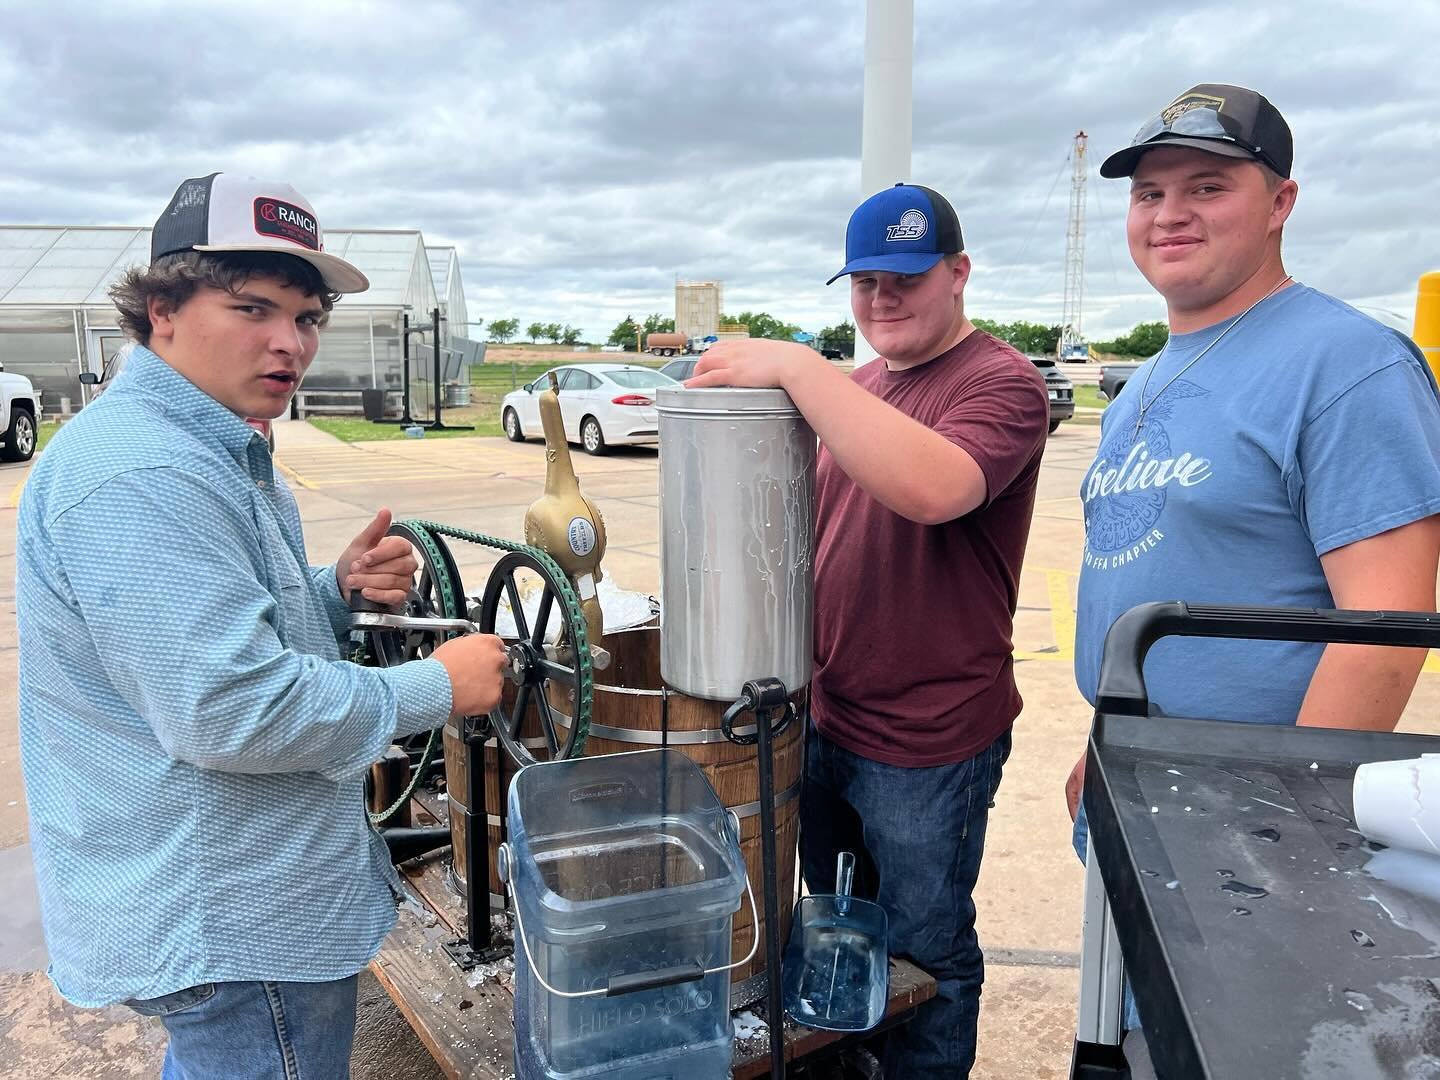 We sure do enjoy some delicious desserts at HPTC, thanks to Diesel Instructor Jayme Spillman and his Diesel students. They spoiled students and staff with homemade ice cream yesterday for Fun Day, and now that they have two BBQ teams, we had the oppo